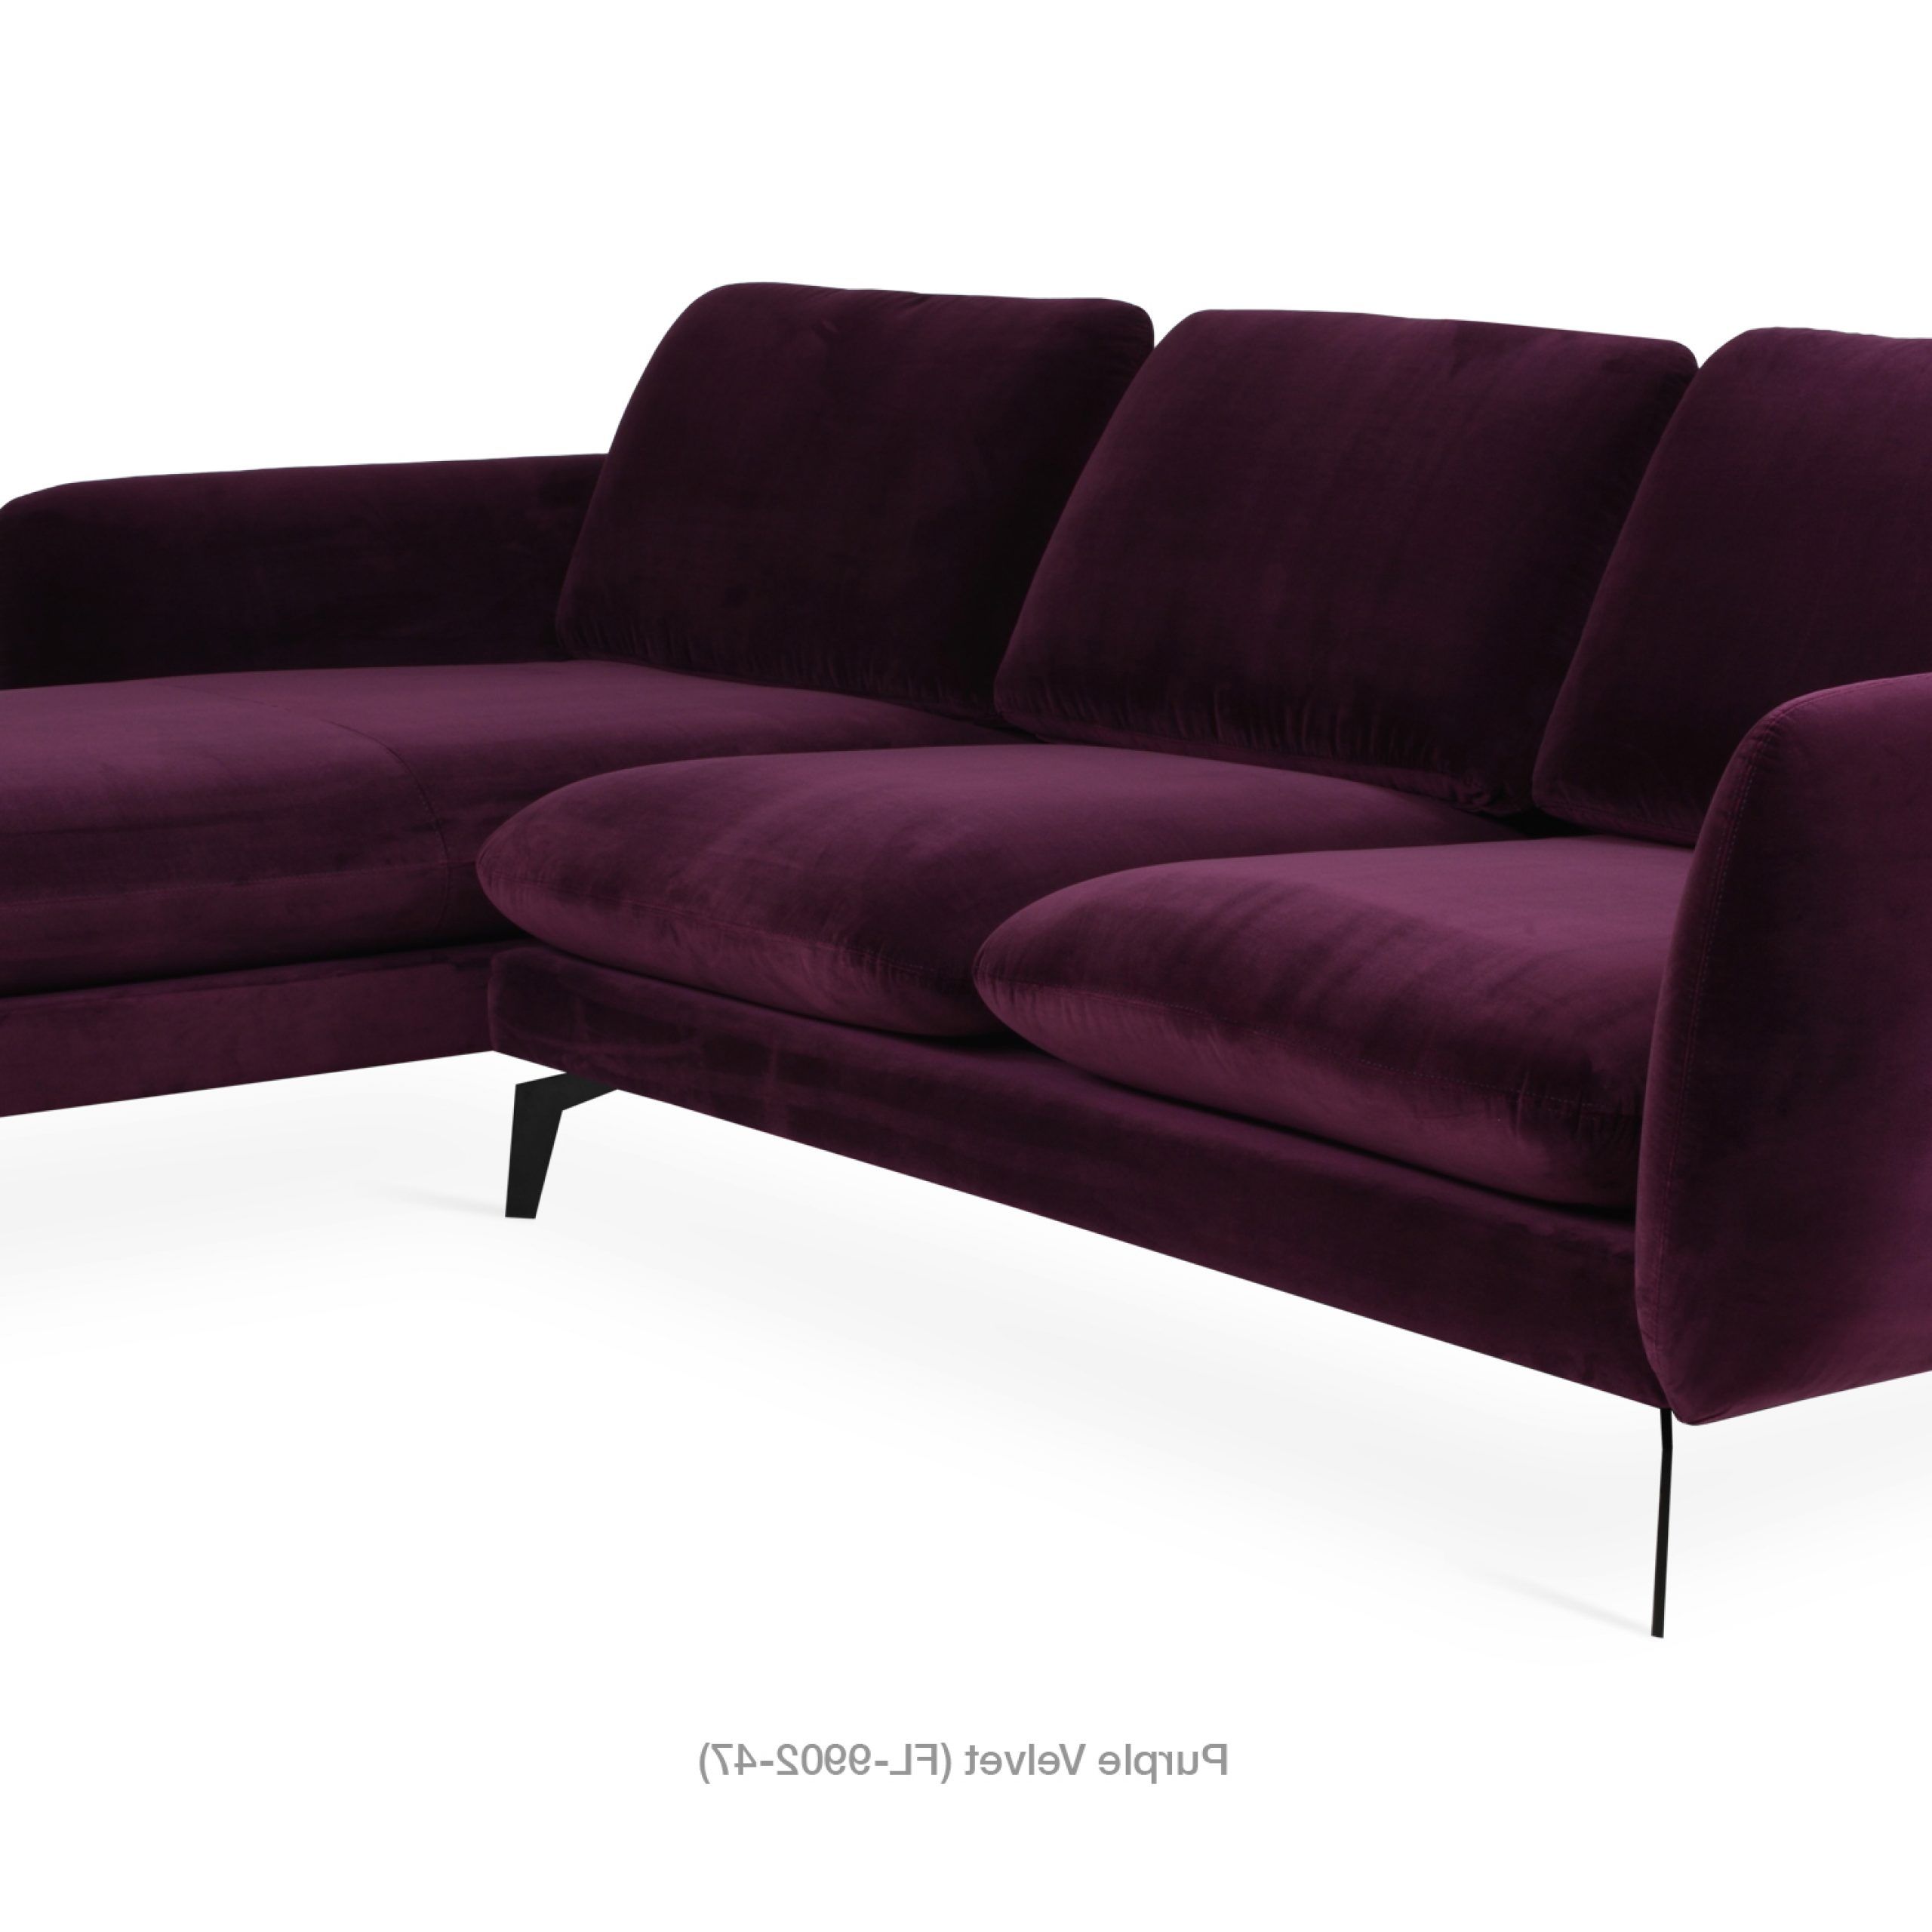 Modern Sofas & Contemporary Couch Inside Preferred Paloma Sofas With Cushions (View 12 of 25)